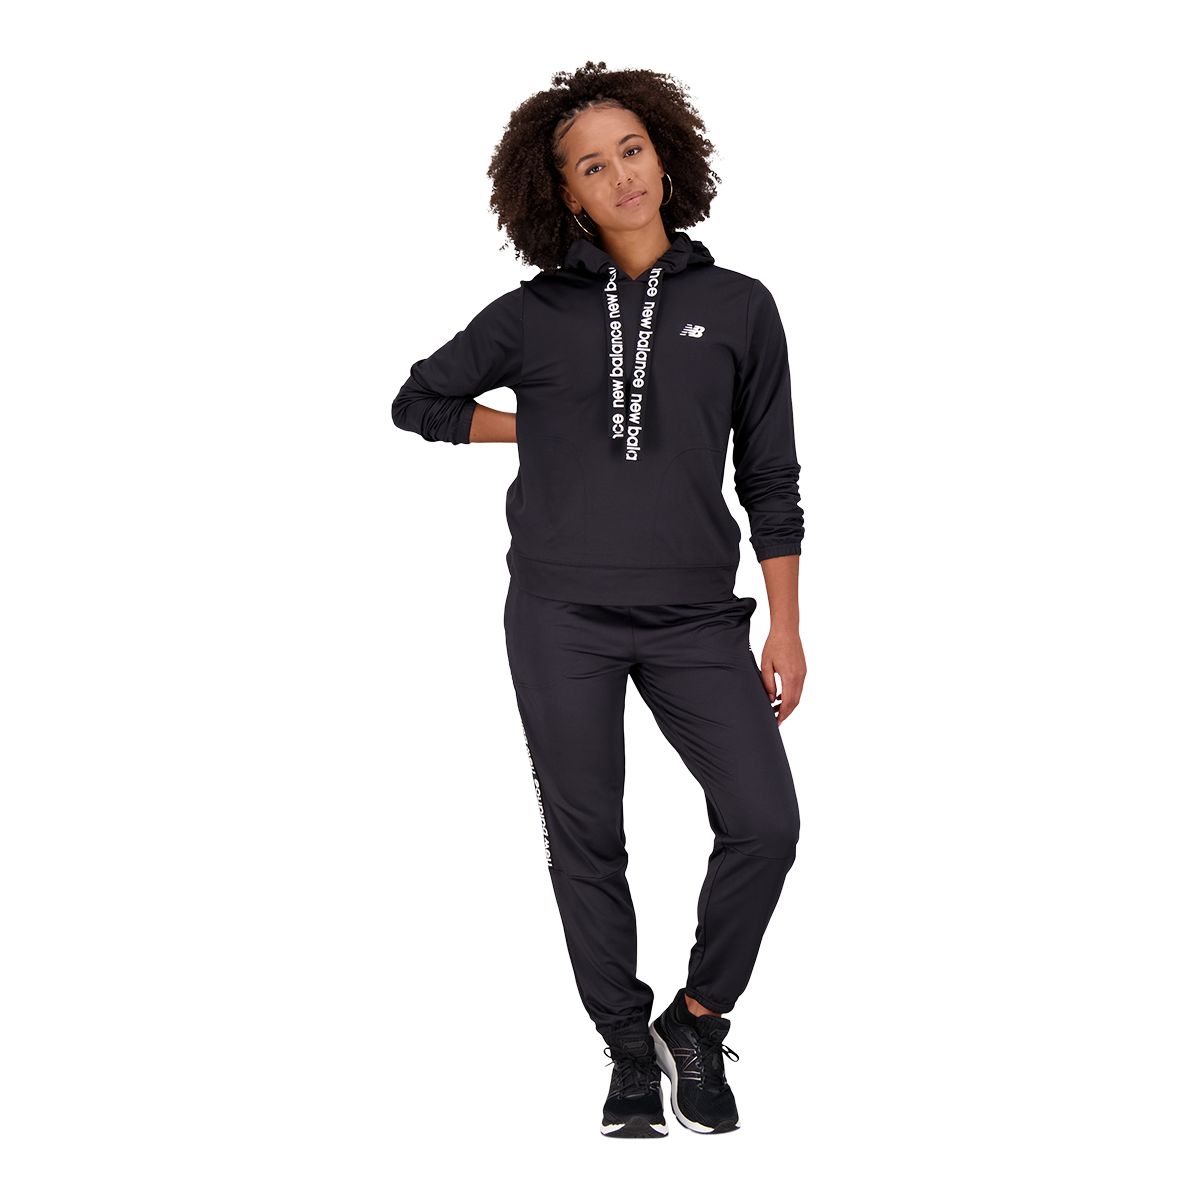 https://media-www.sportchek.ca/product/div-03-softgoods/dpt-70-athletic-clothing/sdpt-02-womens/334004931/nb-w-relentless-terry-hoodie-85dc94a1-6c52-4ed1-9d61-eb1d520bc3c1-jpgrendition.jpg?imdensity=1&imwidth=1244&impolicy=mZoom